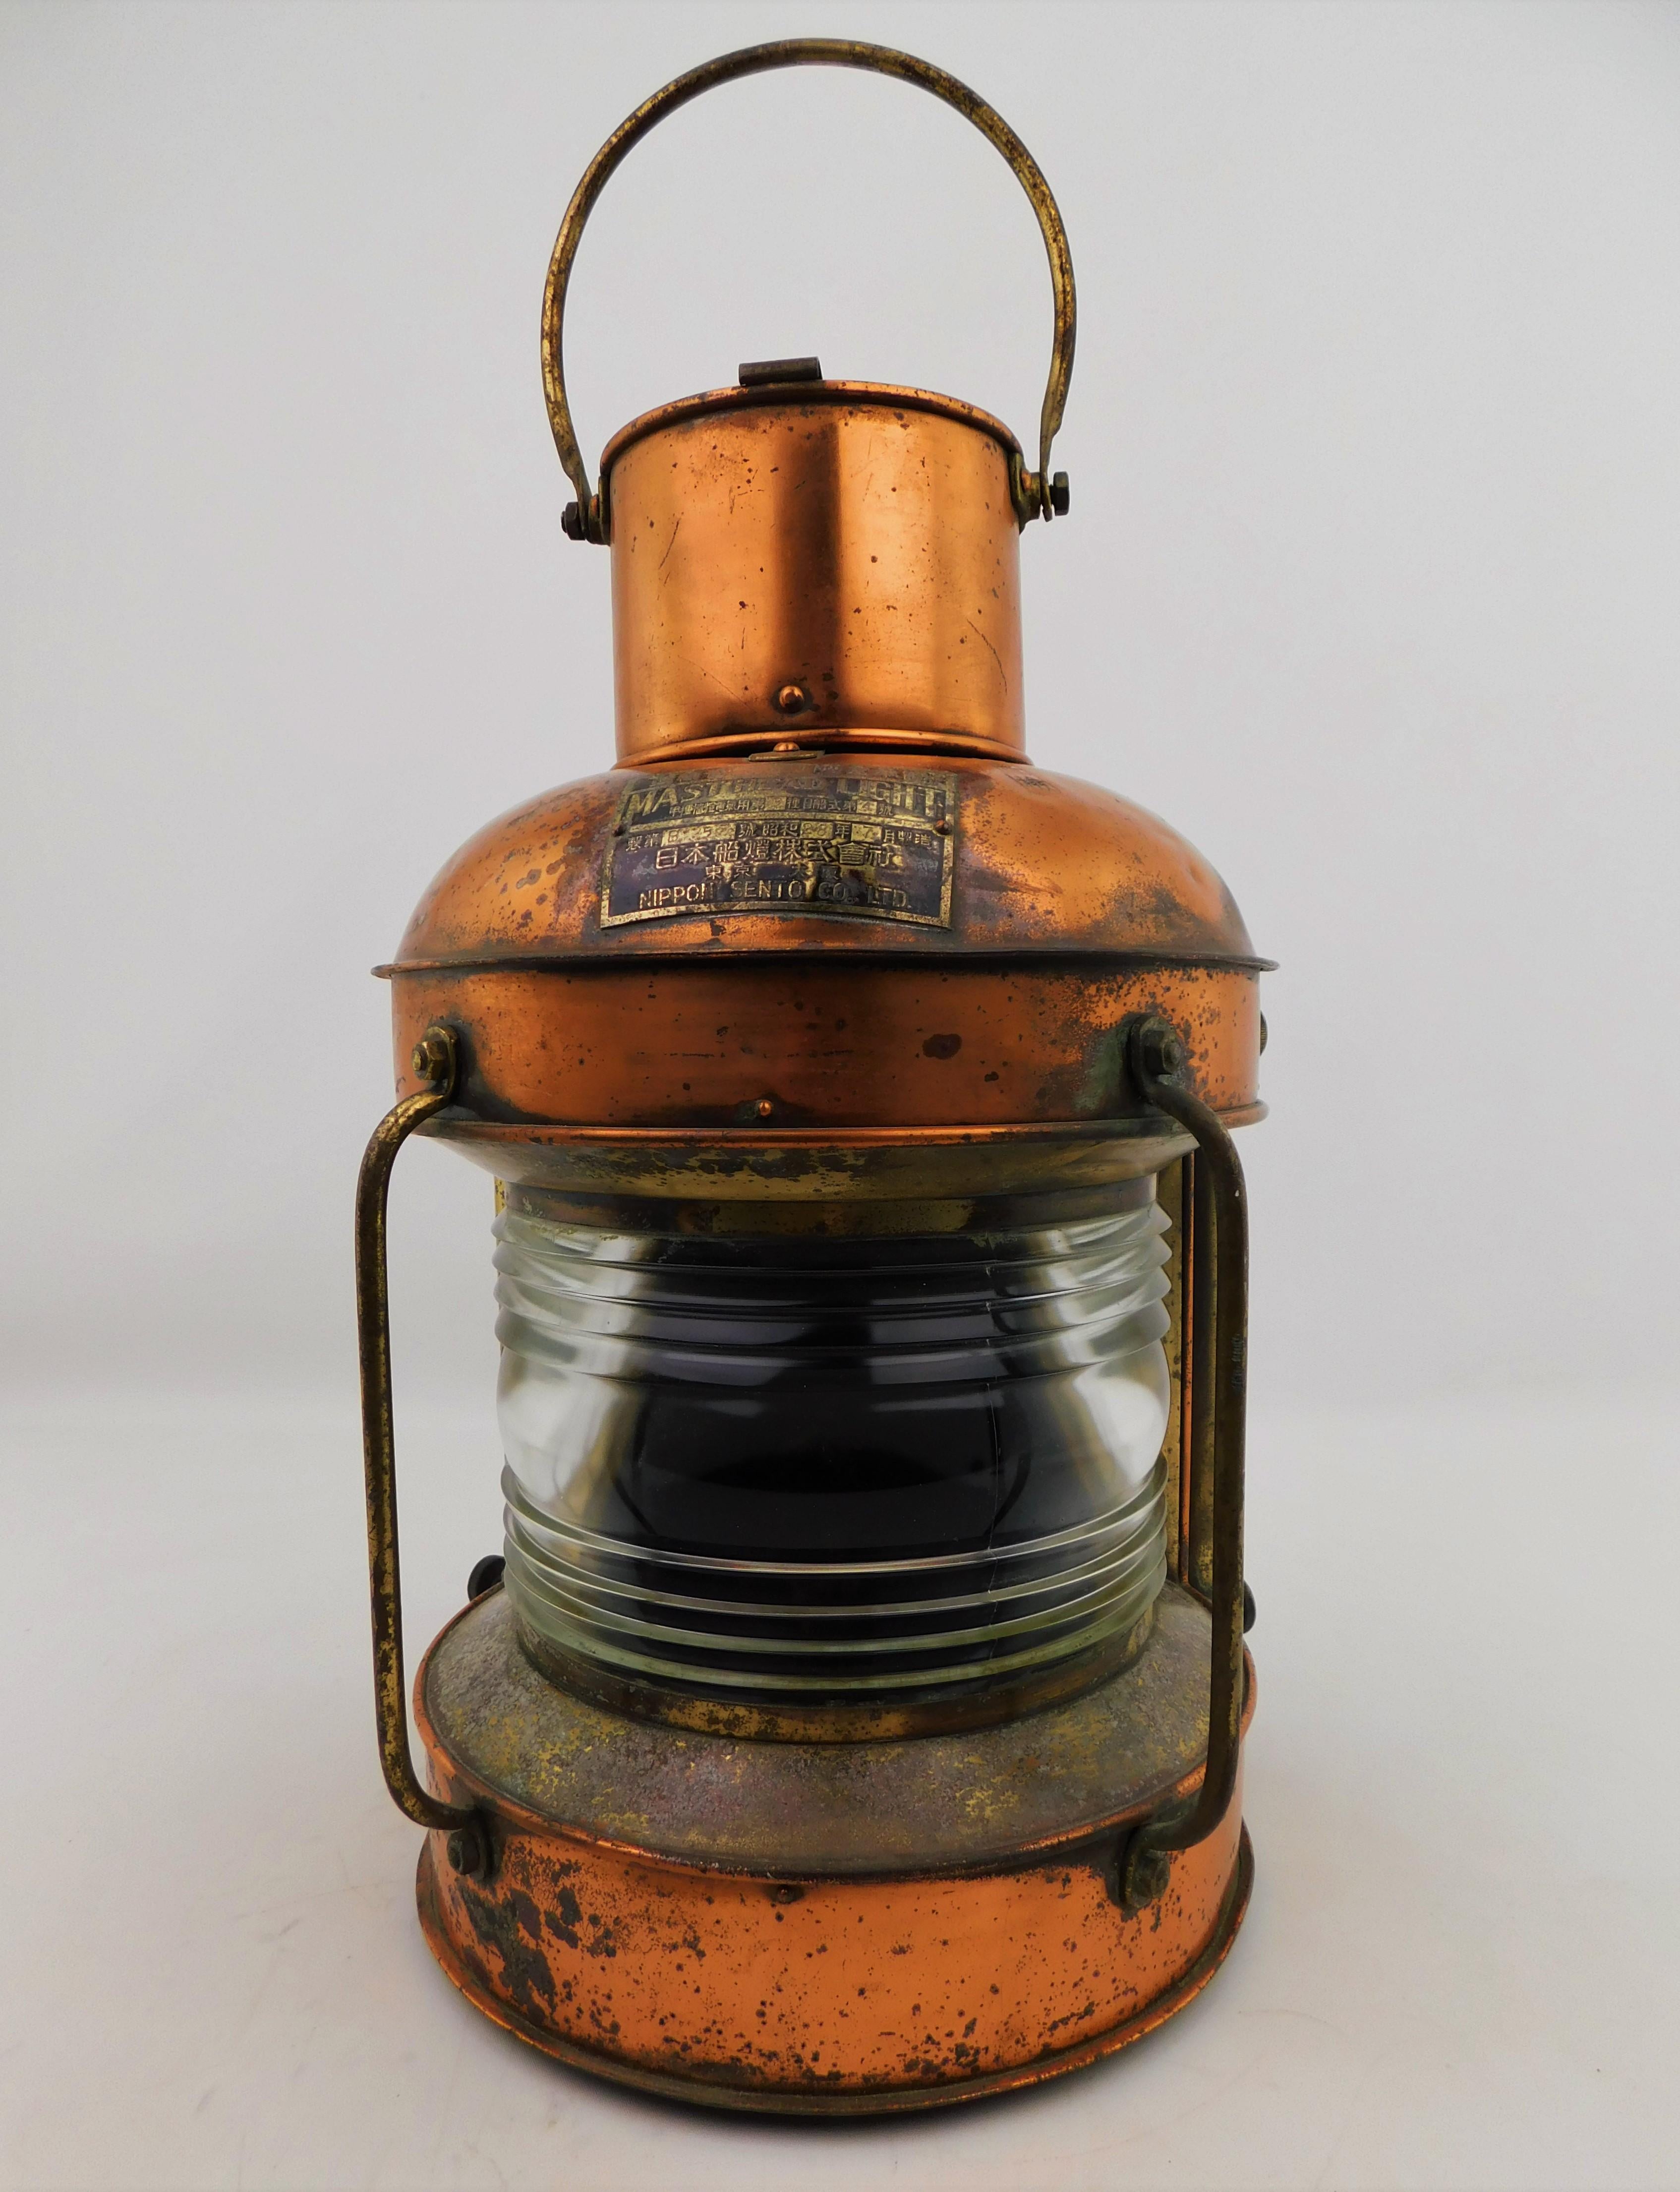 This is a large vintage solid copper and brass nautical 203 Mast head Light, Maritime signal lantern/lamp with Fresnel lens, from the famous Japanese Company “Nippon Sento Co. Ltd” which was founded in 1936. With carrying hoisting handle and two big